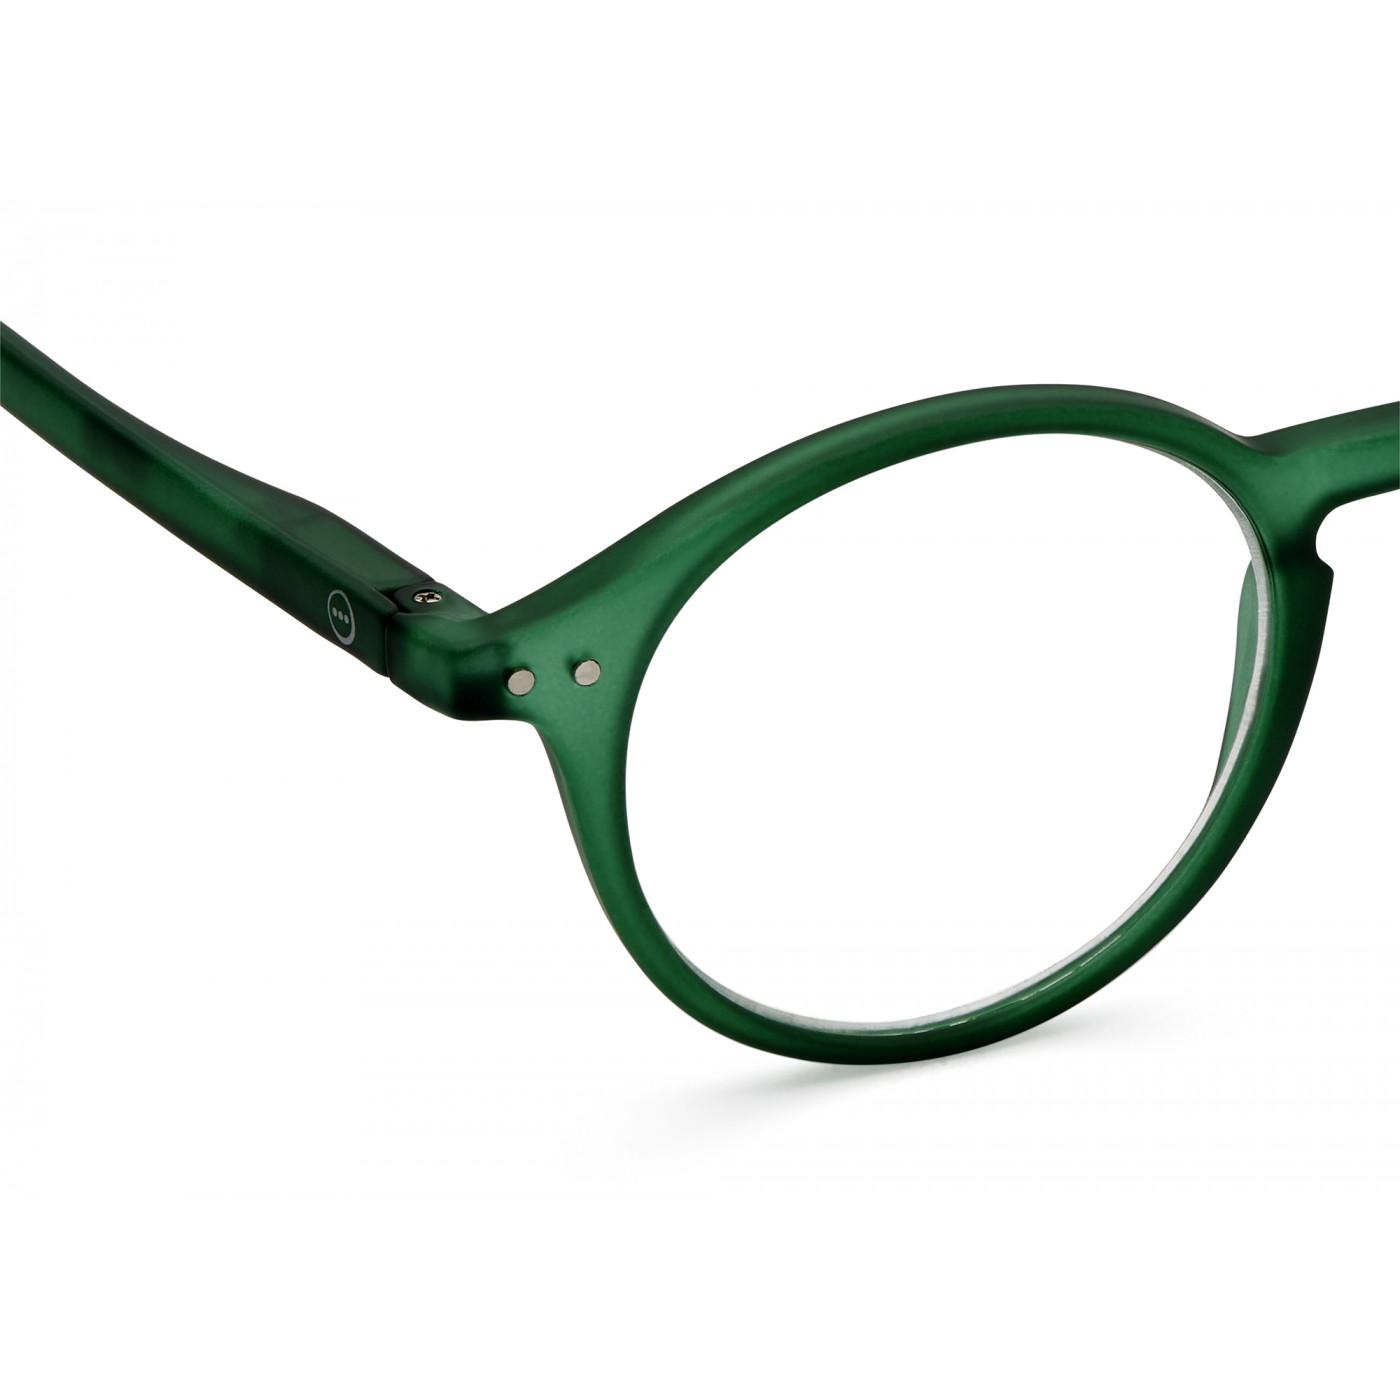 reading glasses frame D crystal green by Izipizi